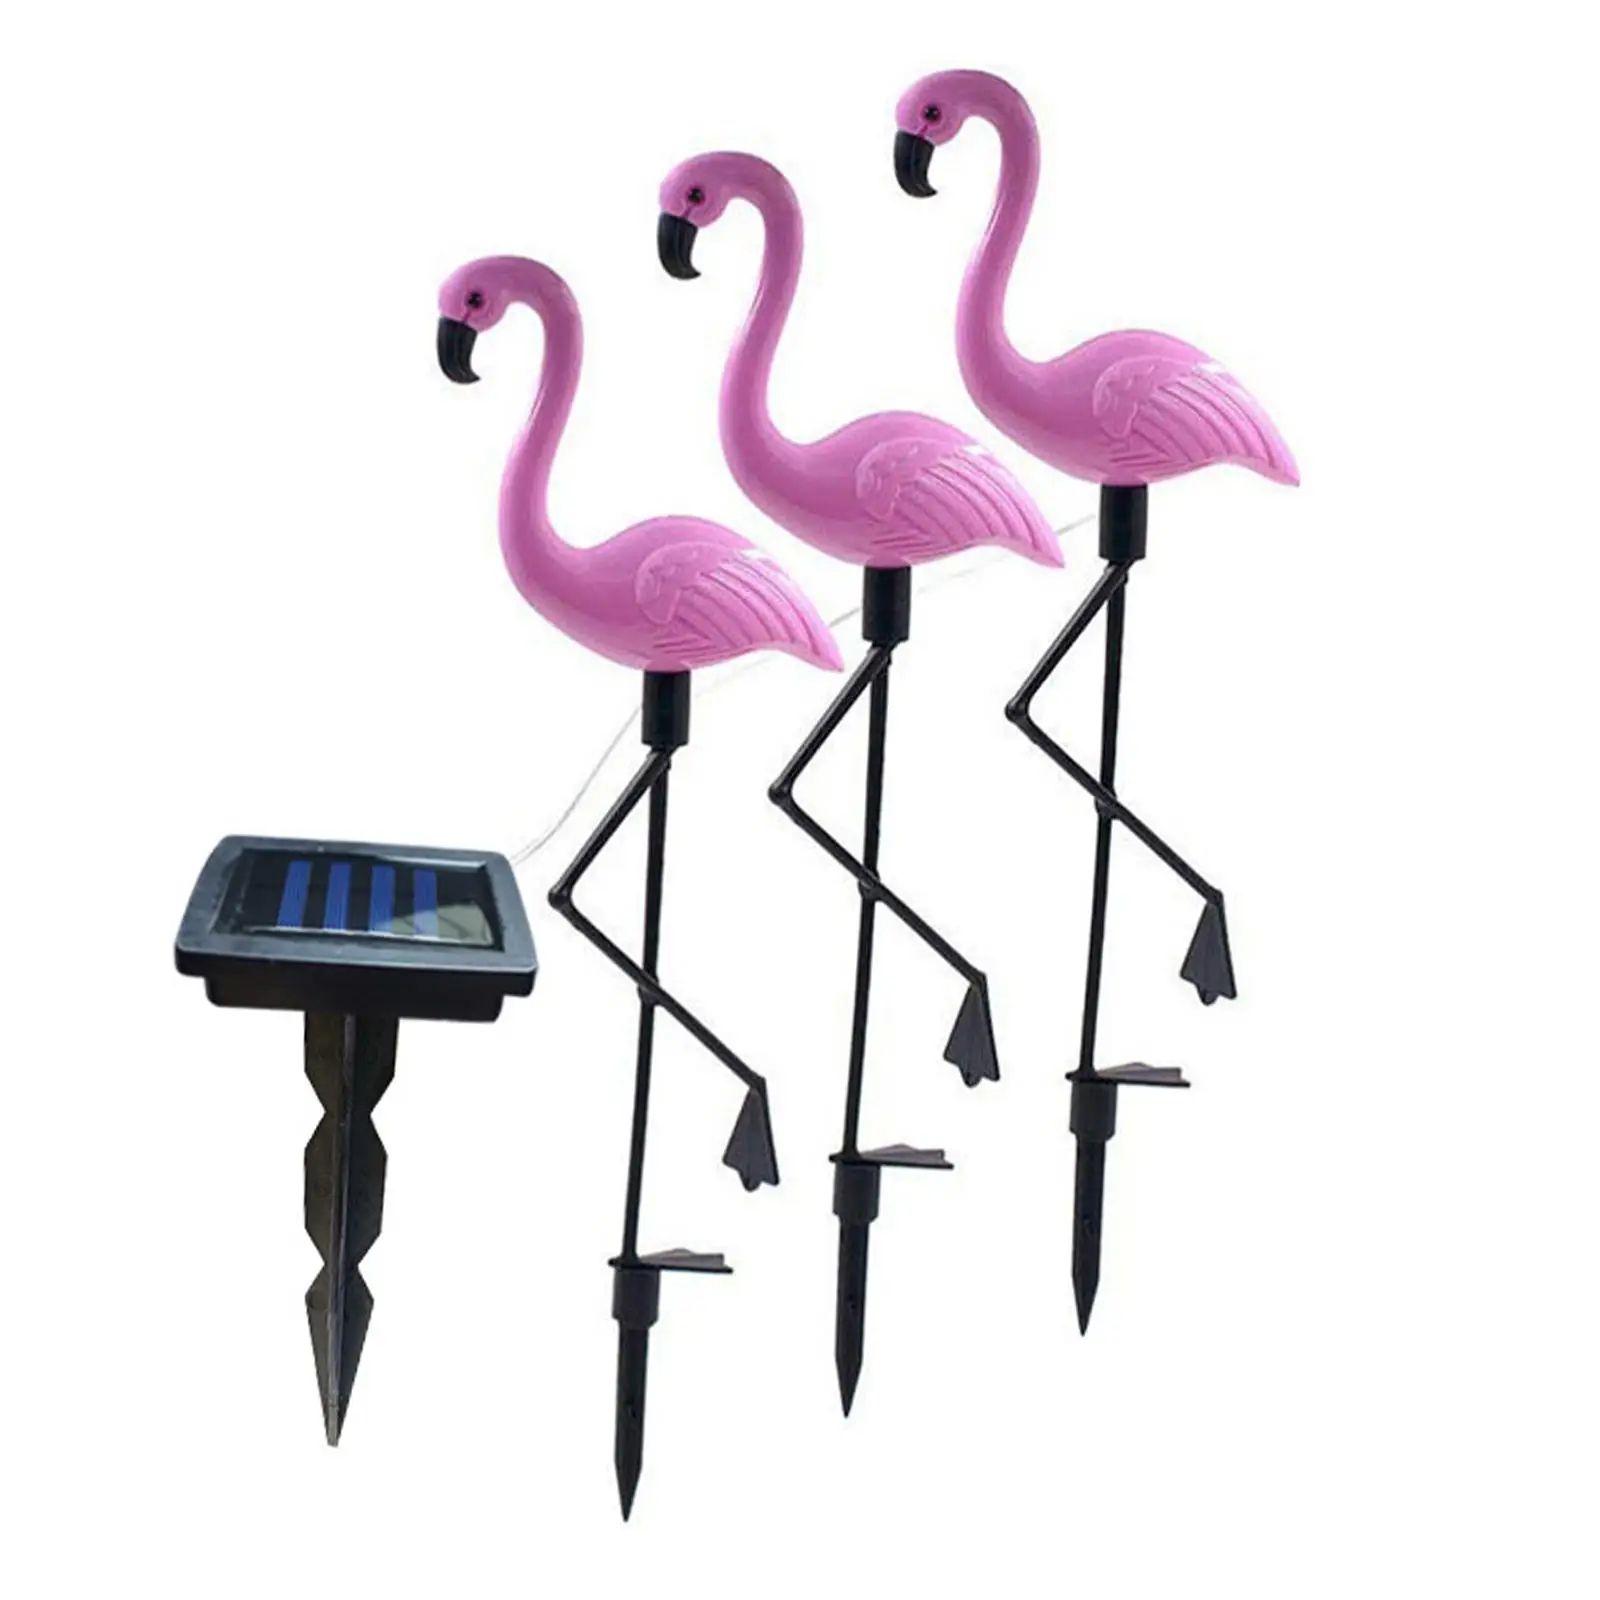 3 Pieces Flamingo Landscape Light Sturdy LED Lights Stake Light Waterproof Solar Power for Wedding Garden Lawn Outdoor